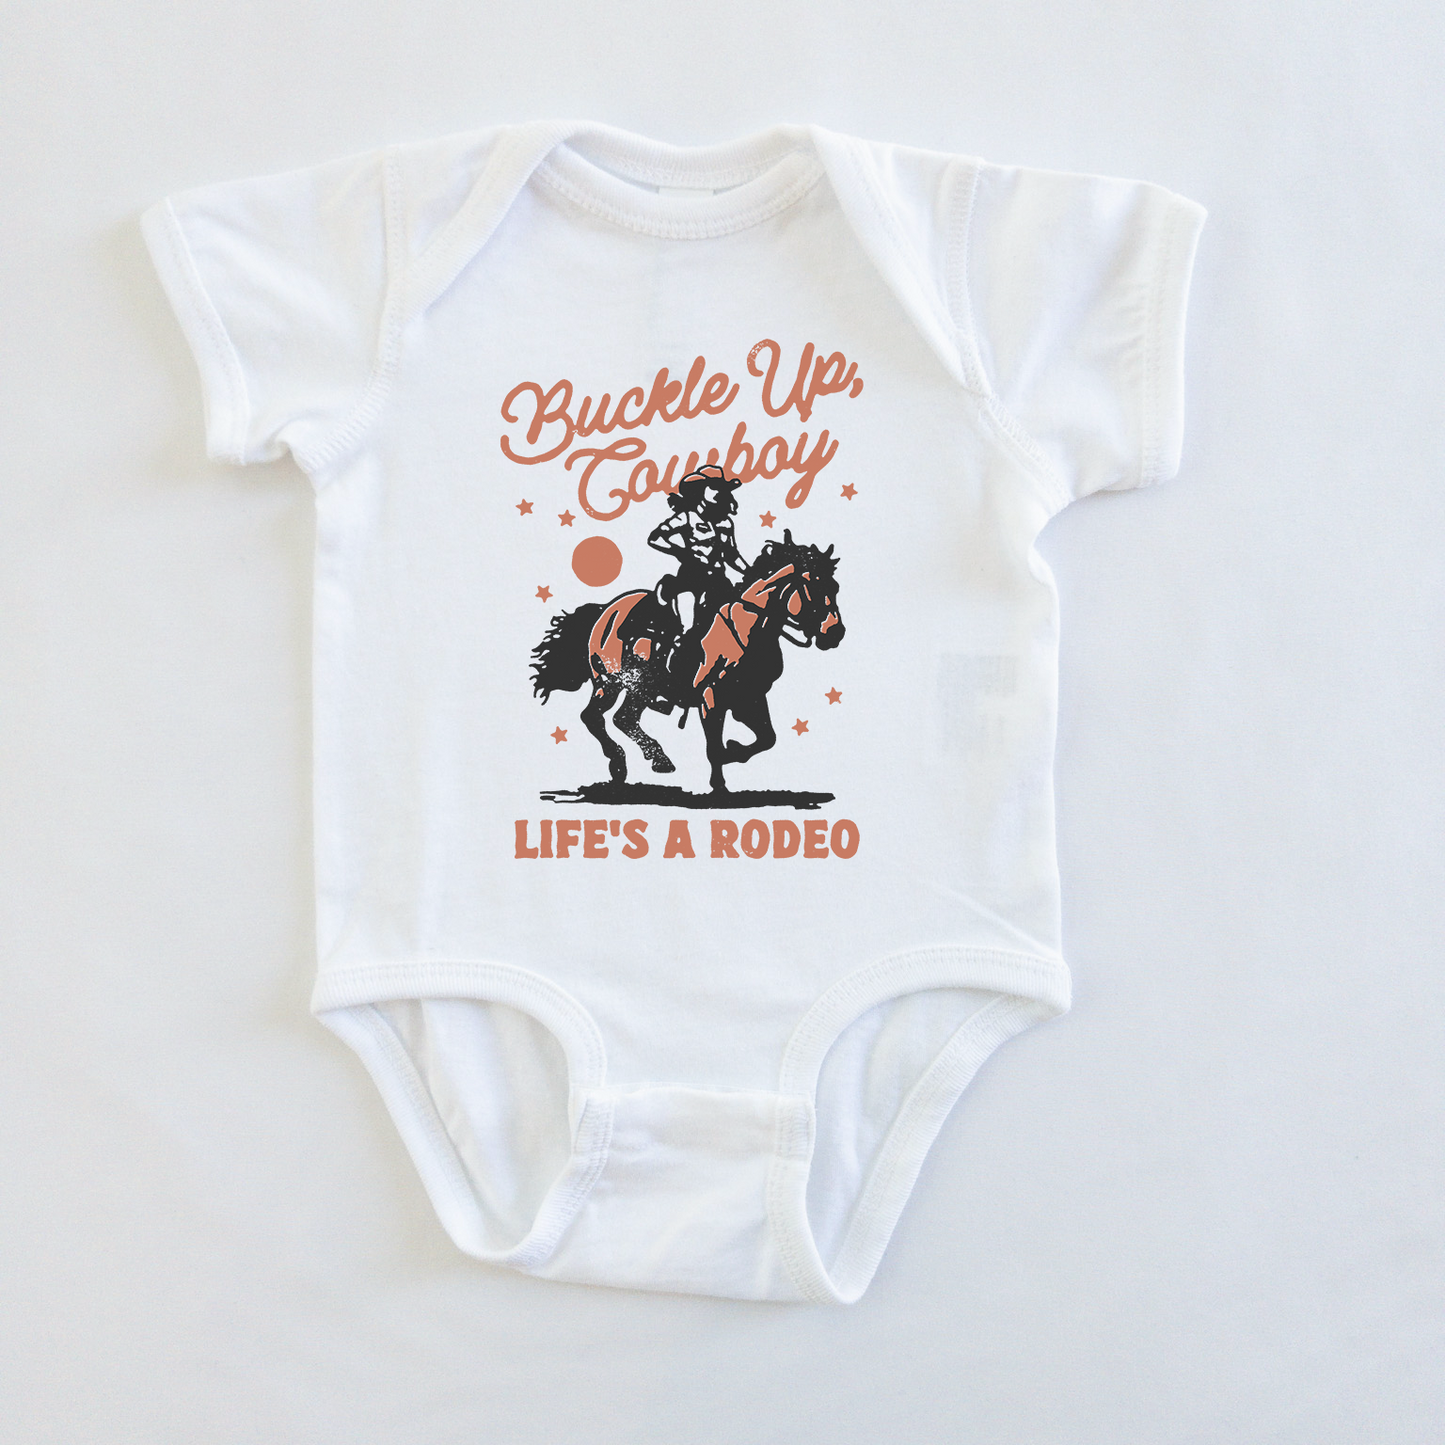 Buckle Up Cowboy Wild West Theme Toddler T-Shirt or Baby Bodysuit